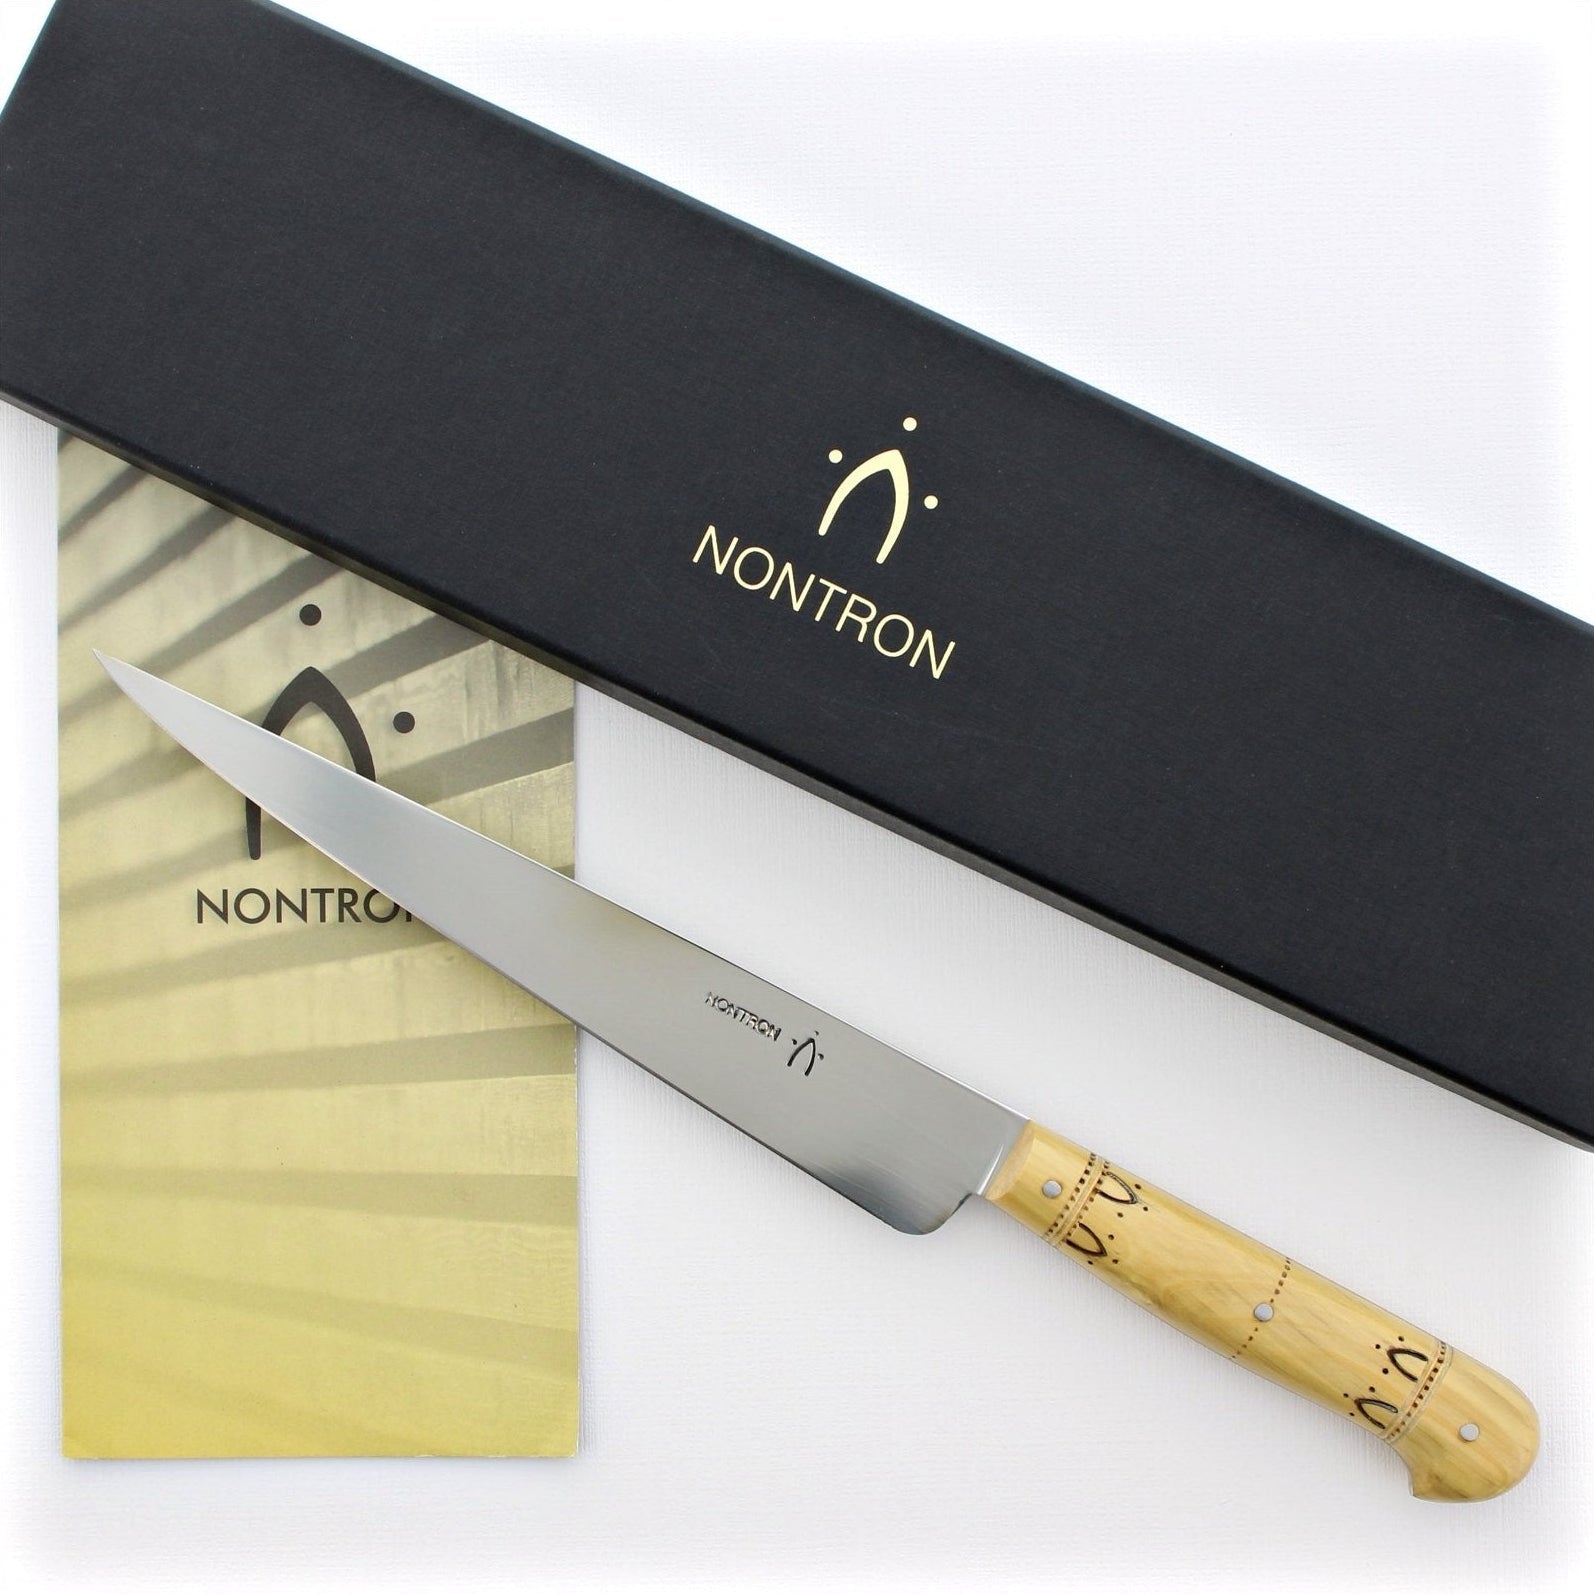 Nontron 8" Carving Knife Boxwood Handle